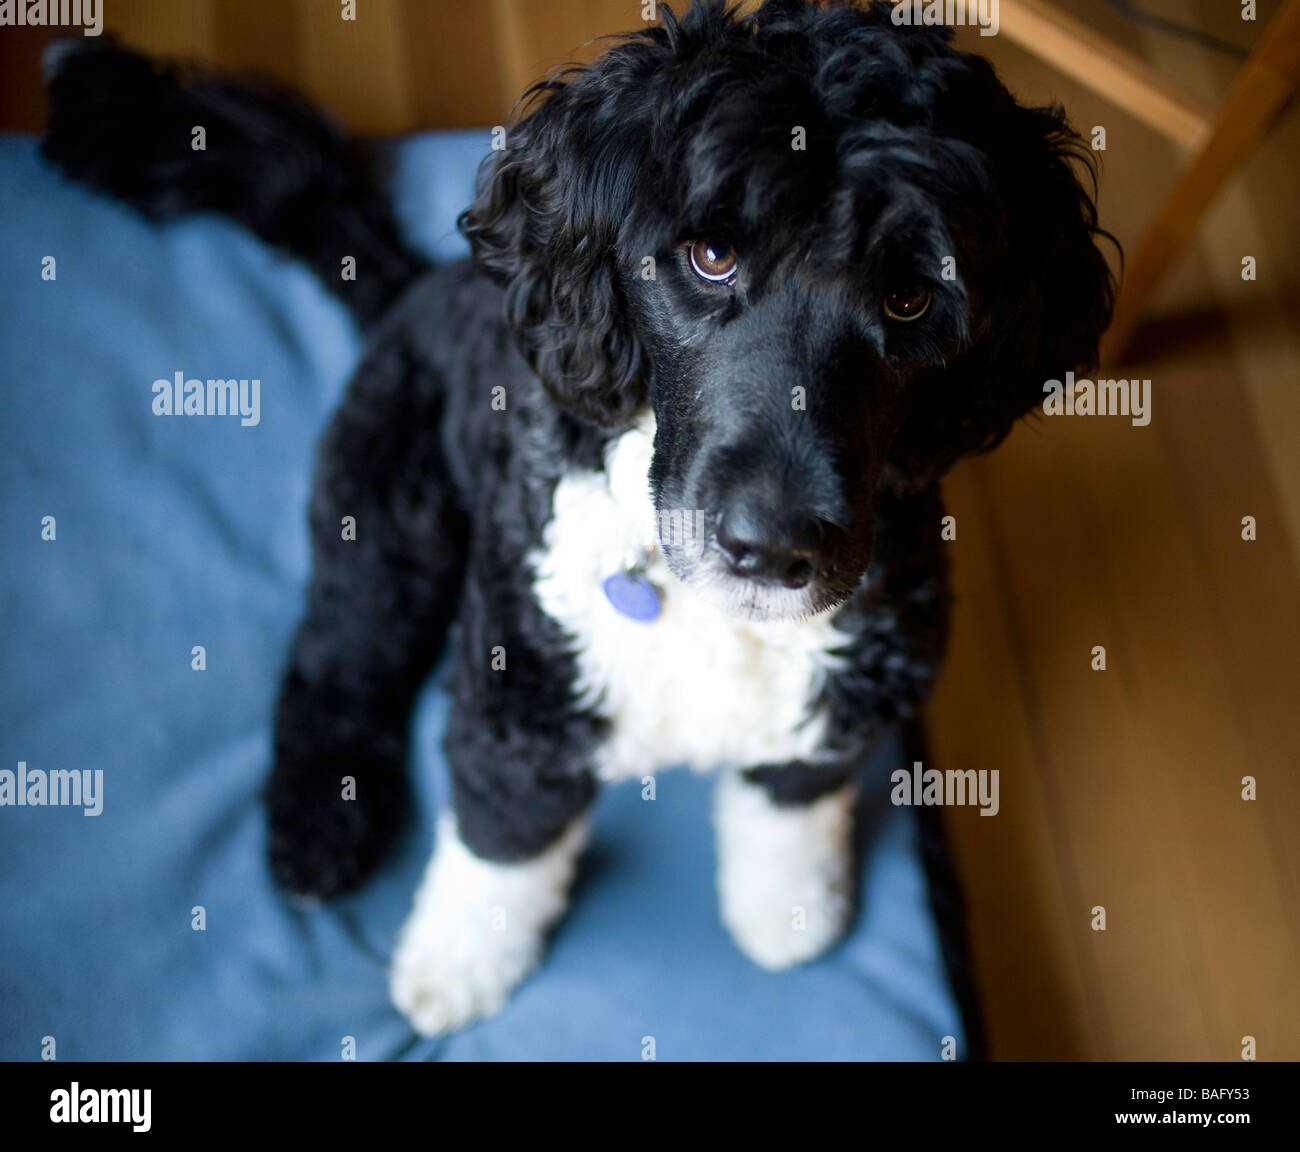 Portuguese Water Dog looking up at his owner sitting on blue bed. Stock Photo